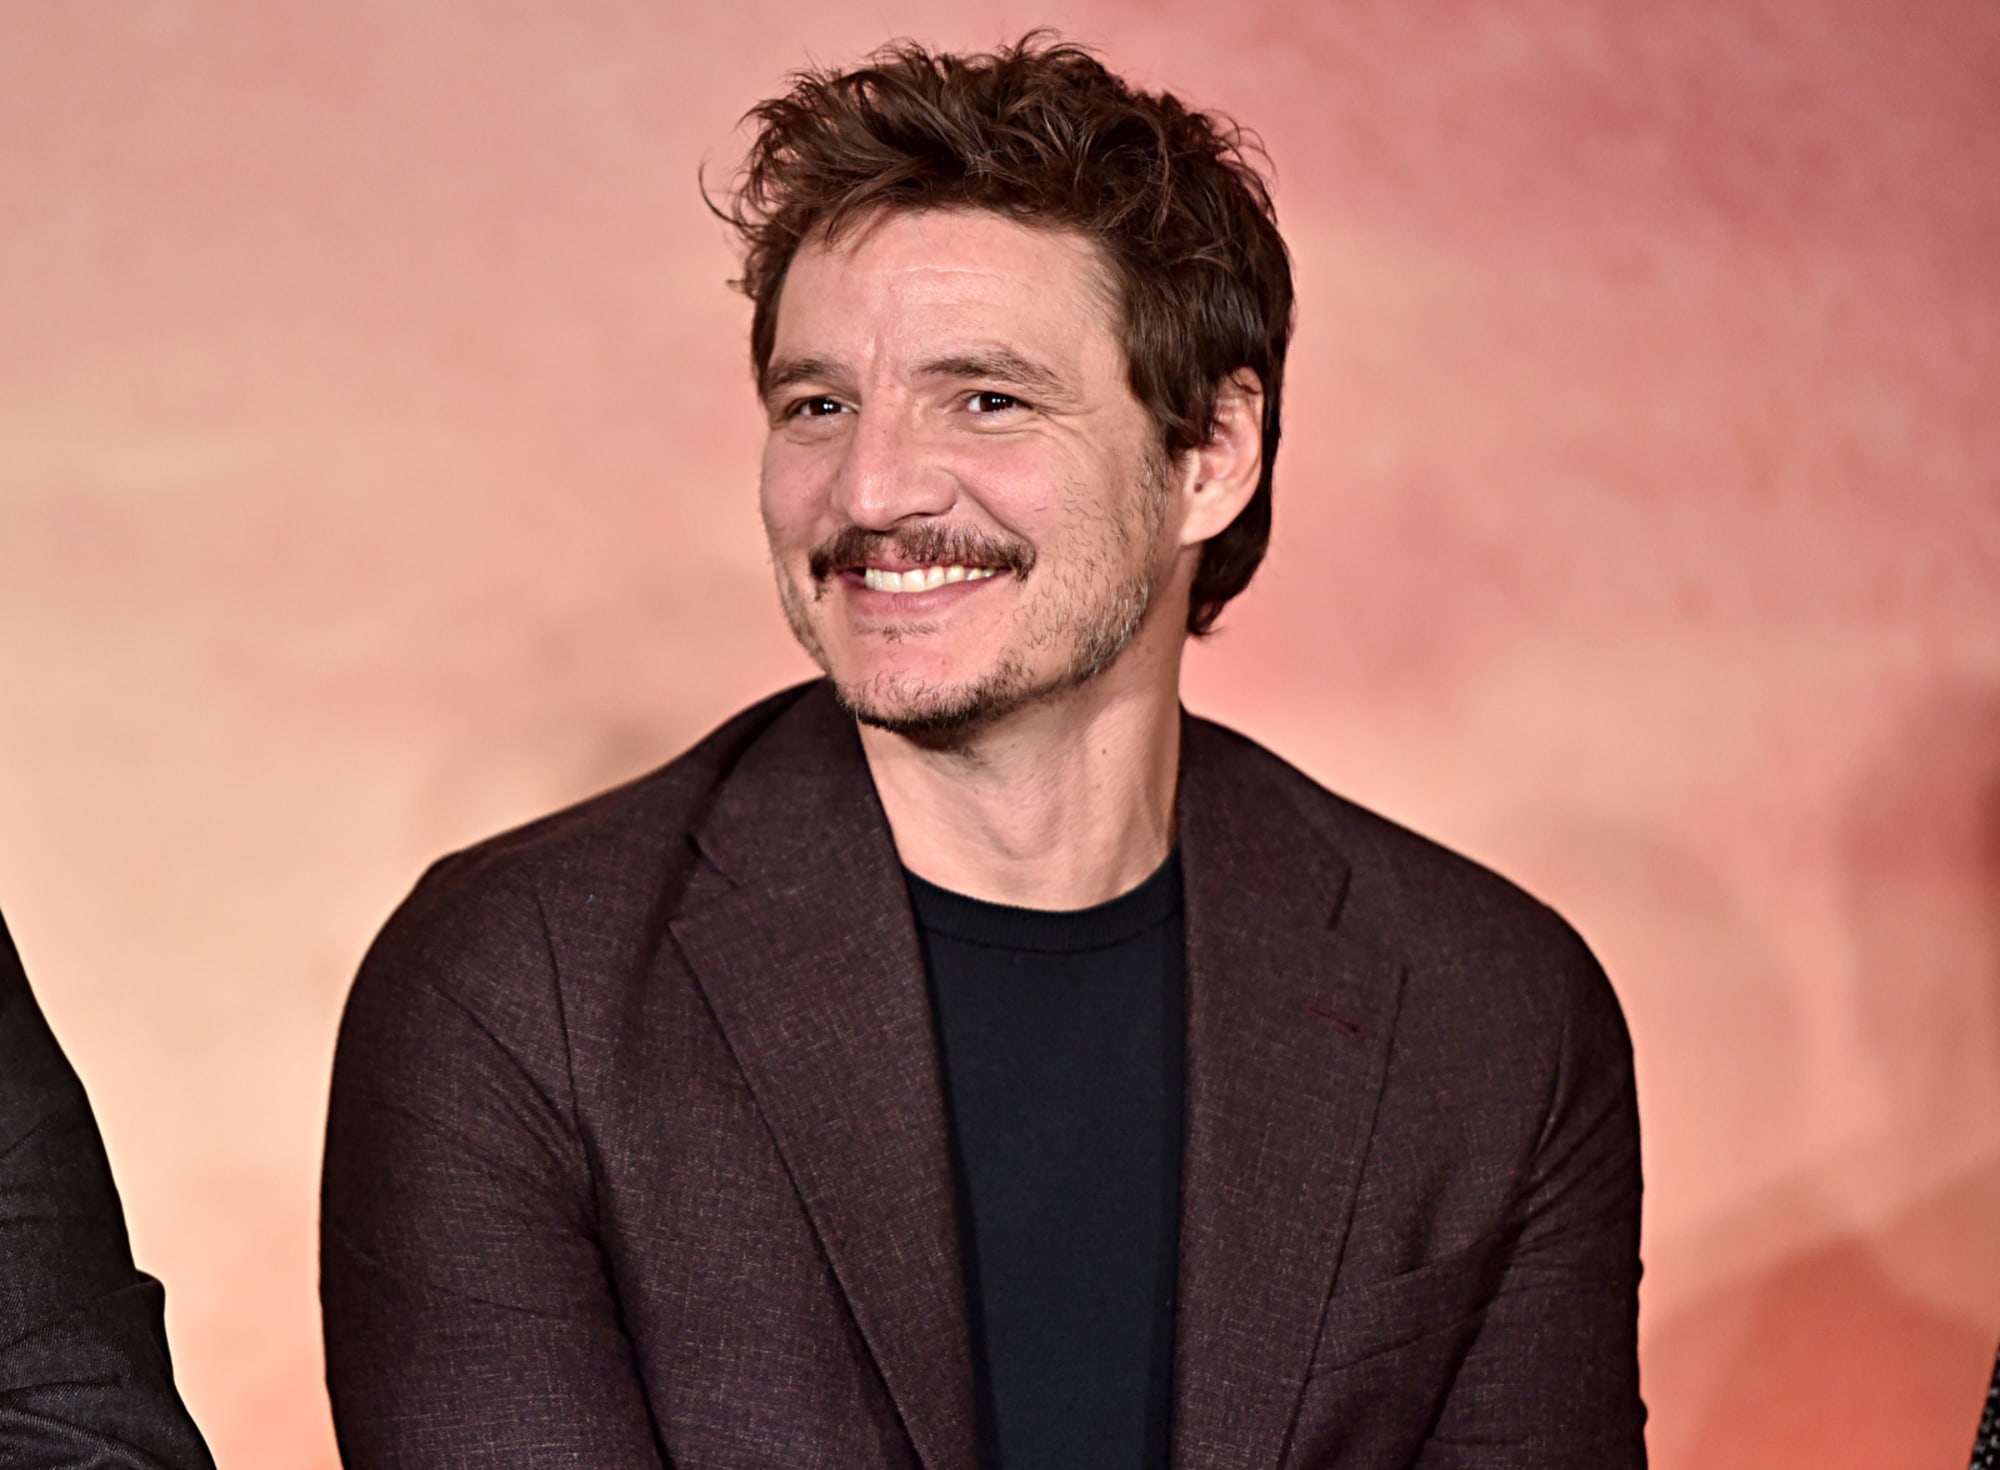 Pedro Pascal In Wonder Woman 1984 Wallpapers